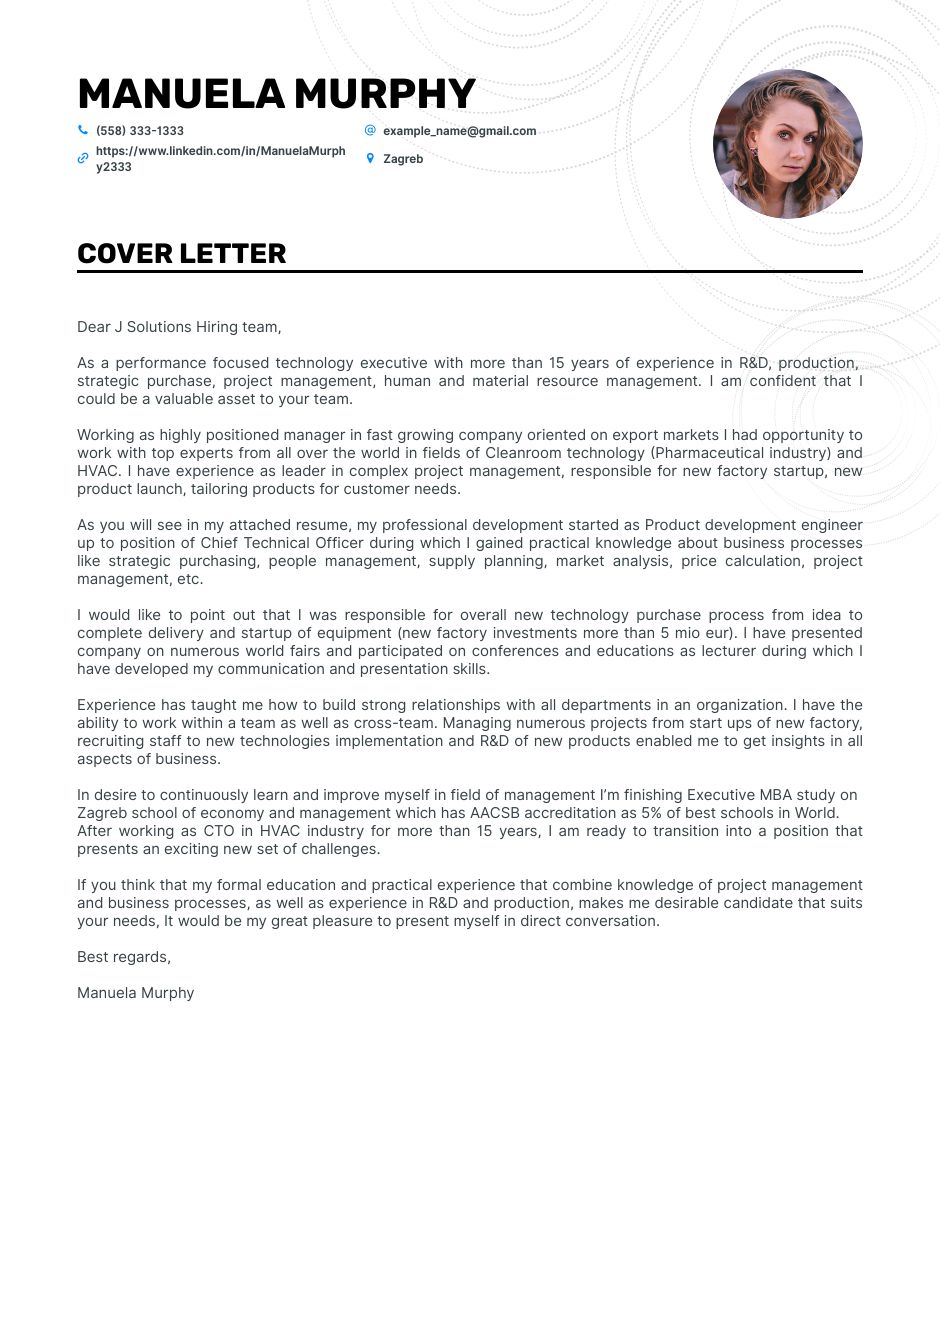 coo-coverletter.png